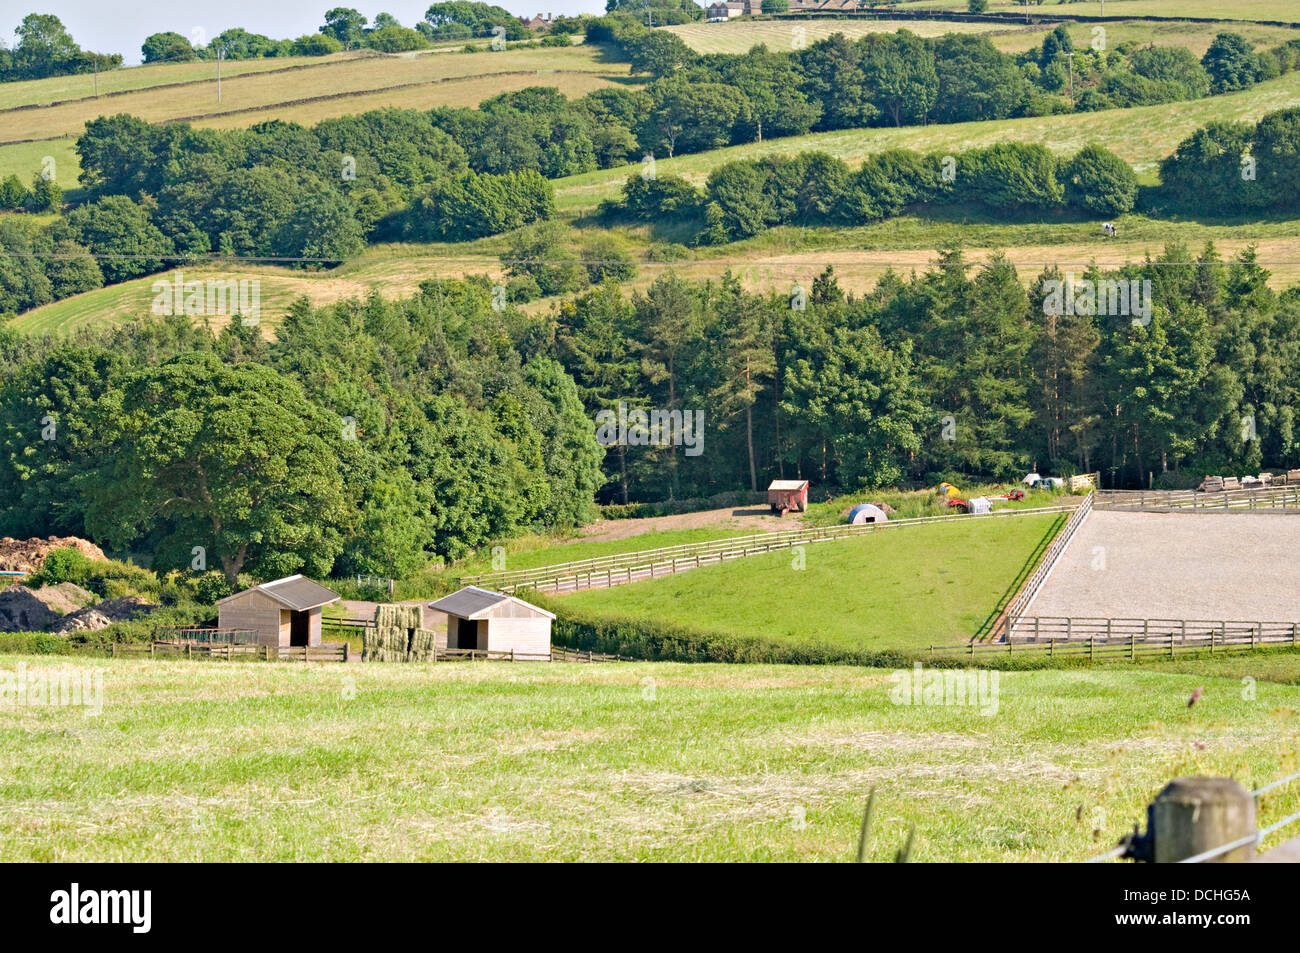 Landscape shot of the Bakewell countryside UK. with a few out sheds and buildings. Stock Photo